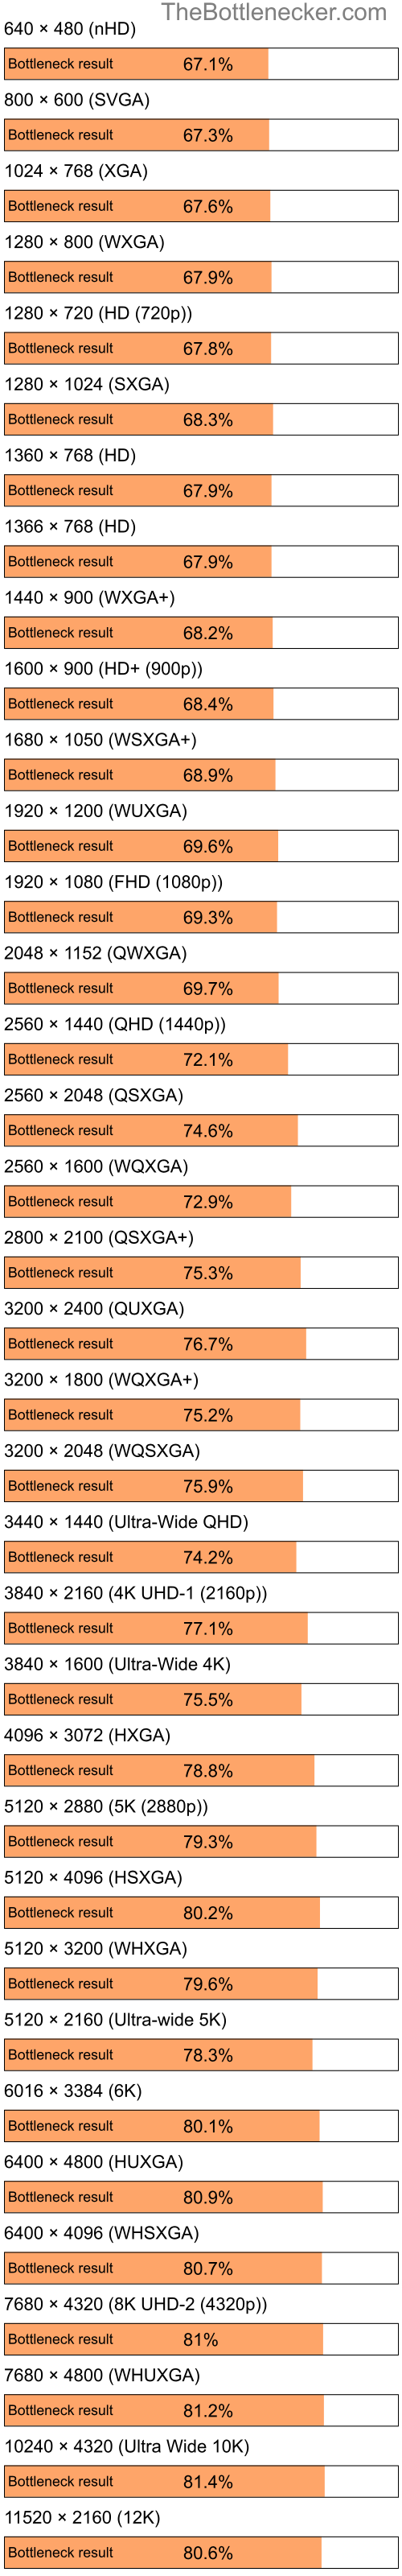 Bottleneck results by resolution for Intel Pentium 4 and NVIDIA Quadro NVS 140M in General Tasks